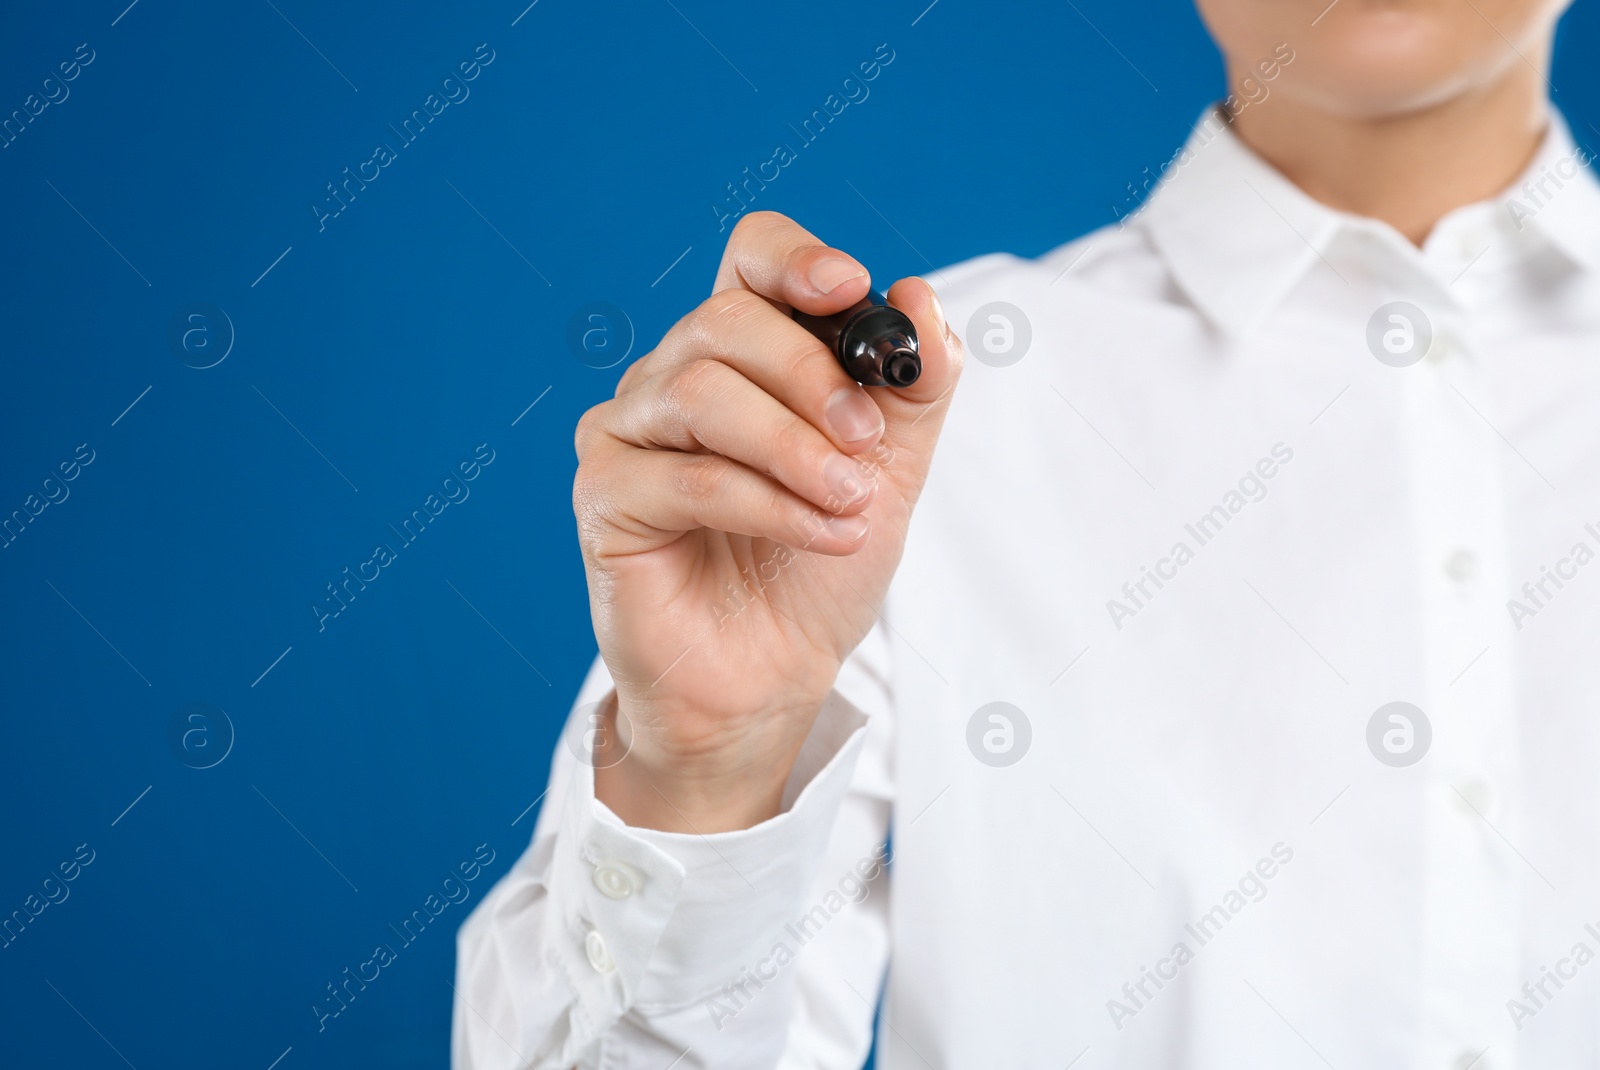 Photo of Woman with marker against blue background, focus on hand